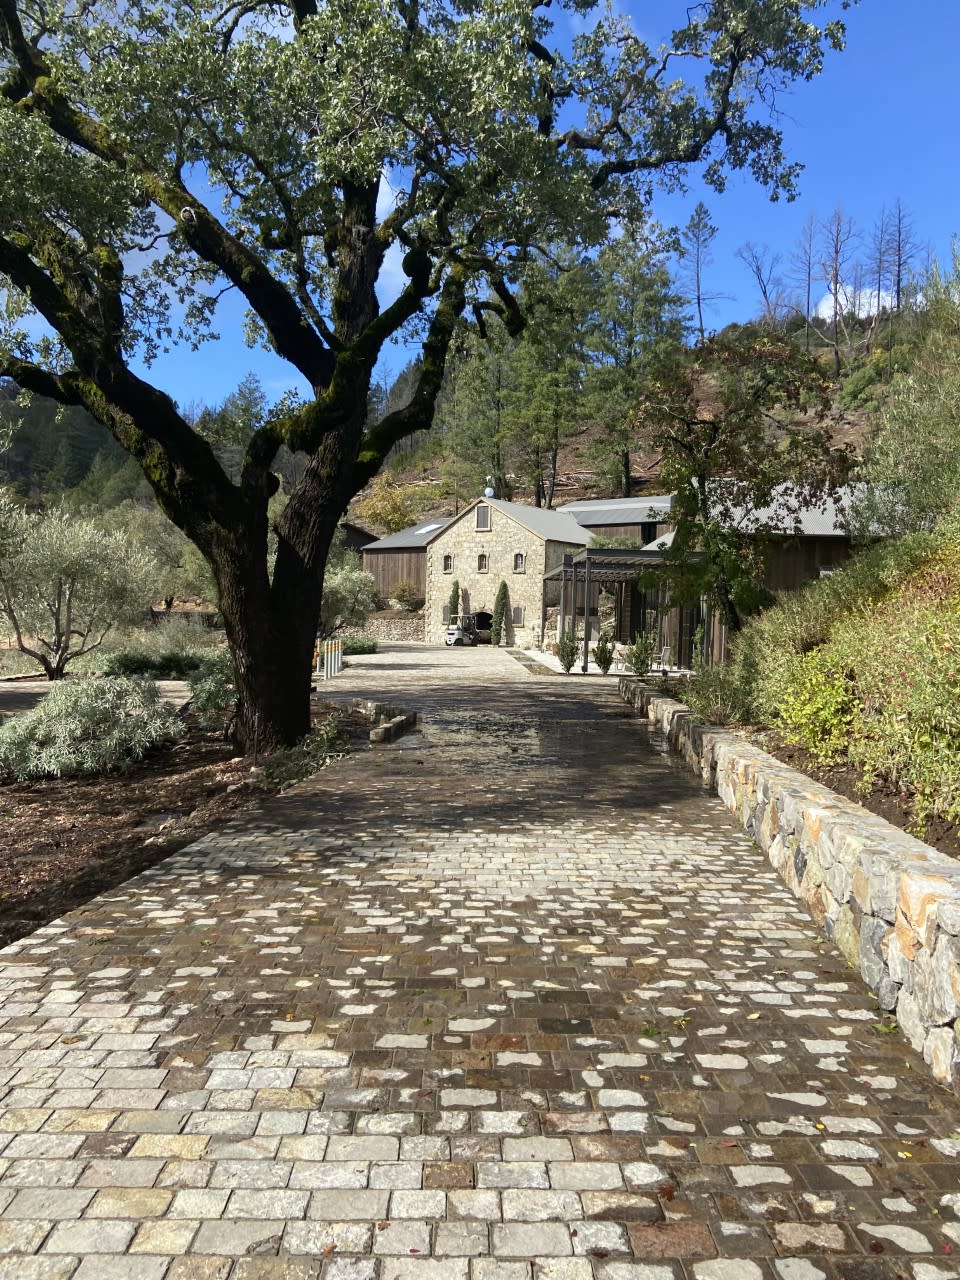 The entrance to the Mayacamas estate in Napa Valley includes a view of the old stone winery next to the newly rebuilt tasting room. - Credit: Kellie Ell / WWD